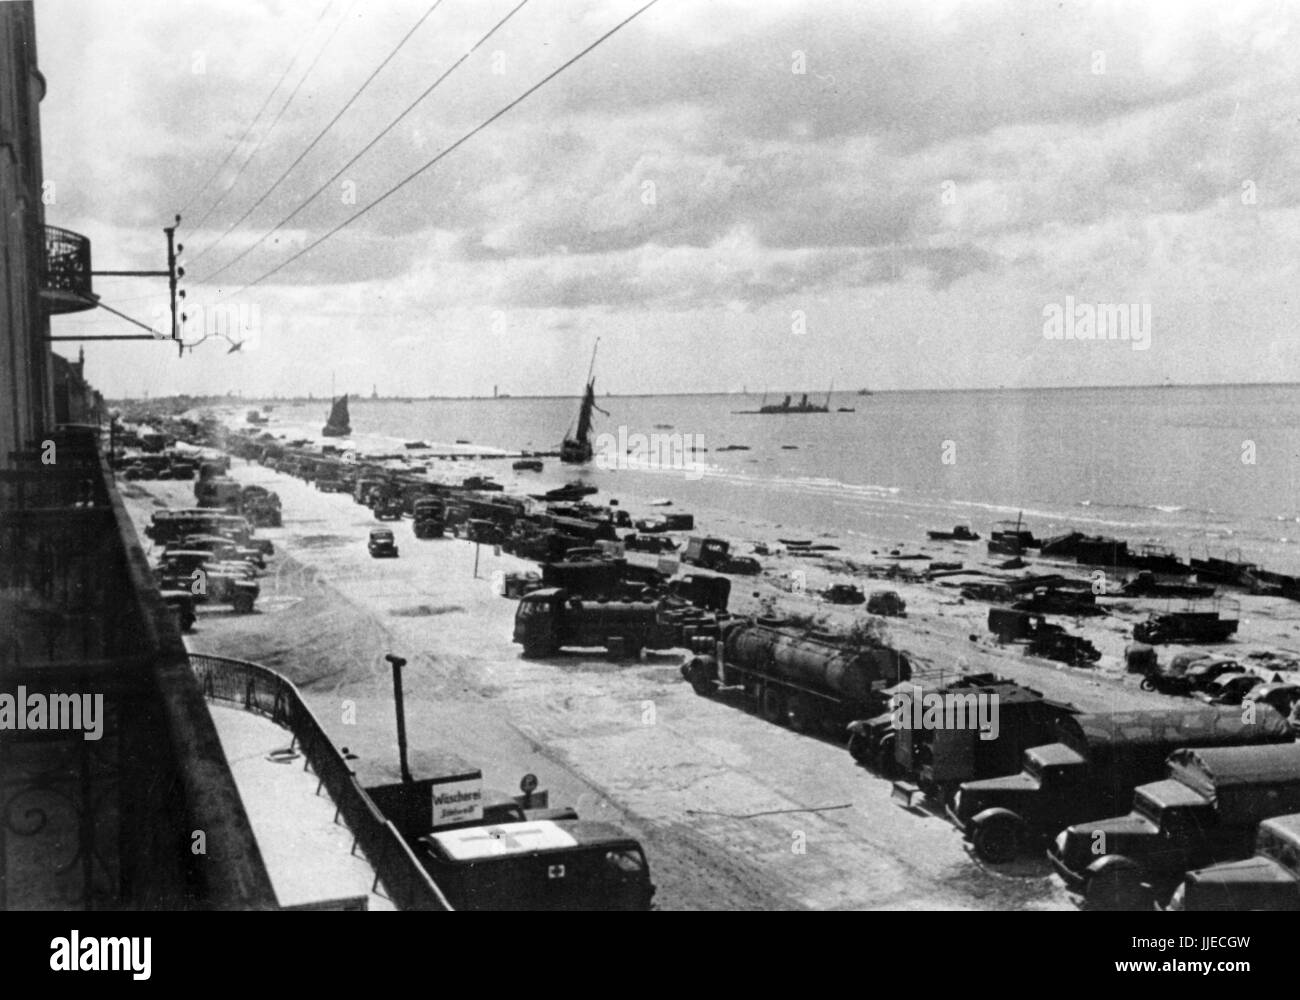 The National Socialist propaganda image shows British vehicles in Dunkirk (Dunkerque), France, after the British evacuation and the siege of the city by the German Wehrmacht, photographed in July 1940. A Nazi state reporter has written on the back of the picture on 02.07.1940, 'After the siege of Dunkirk. In daily stints of eight hours, men from Organisation Todt have carted away car after car left behind by the English army. Yet still thousands of them line the coast of northern France.' Fotoarchiv für Zeitgeschichte - NO WIRE SERVICE ? | usage worldwide Stock Photo